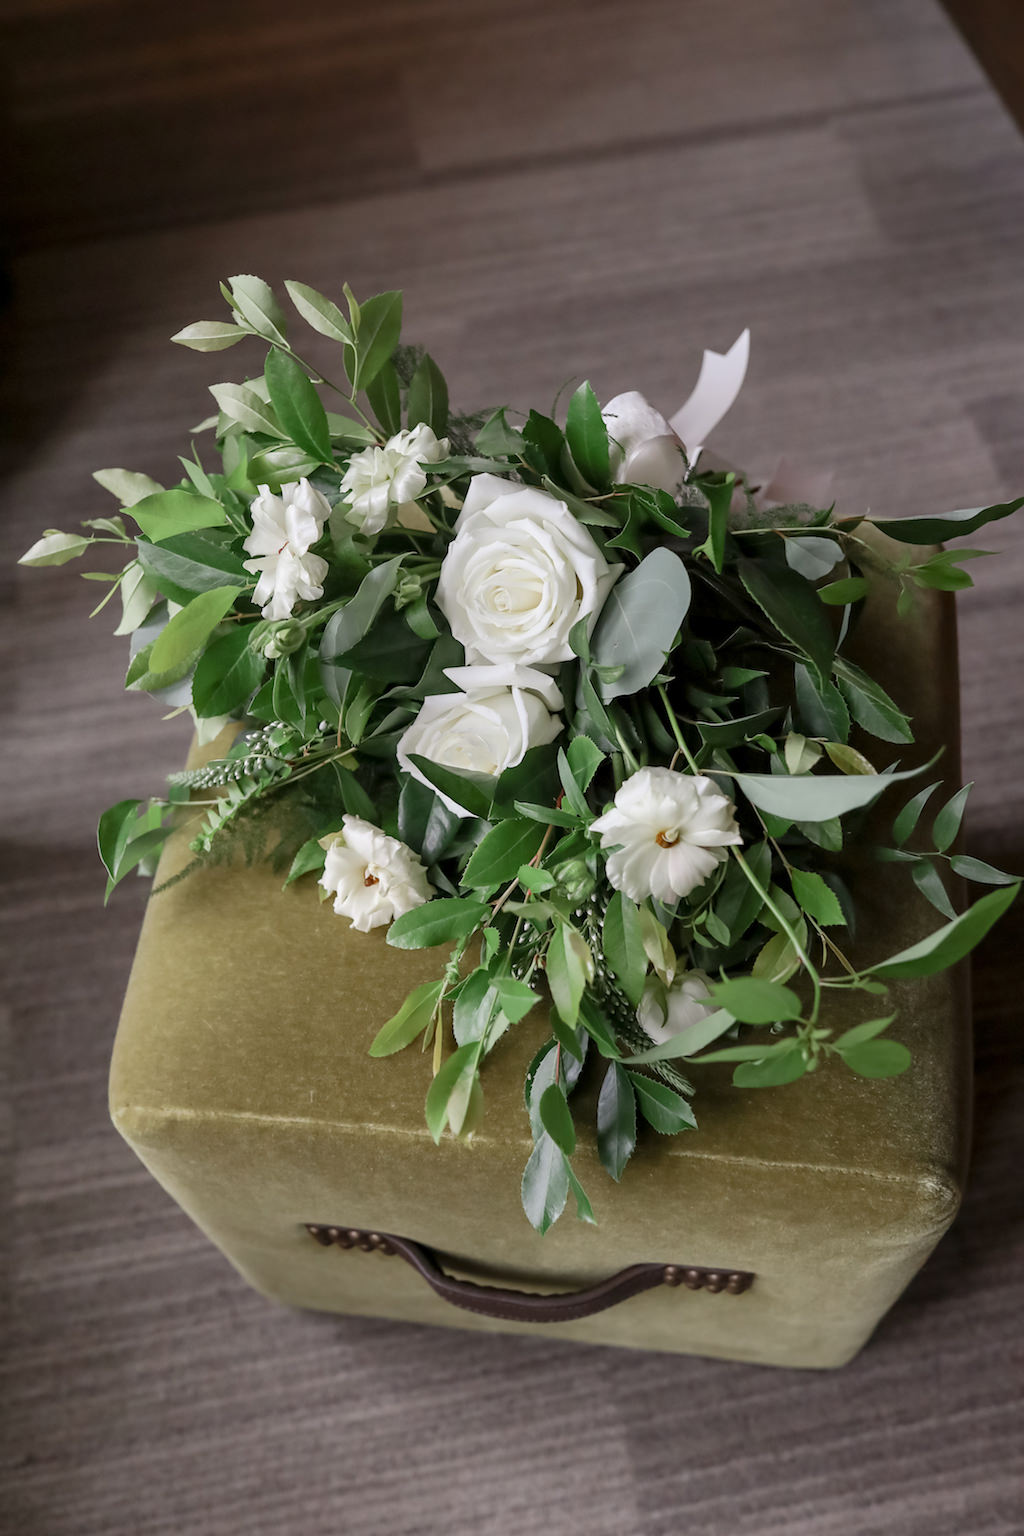 White Roses, Daisies and Greenery Wedding Floral Bouquet on Velvet Green Box | Tampa Bay Photographer Lifelong Photography Studios | Wedding Planner Parties A'La Carte | Florist Cotton and Magnolia